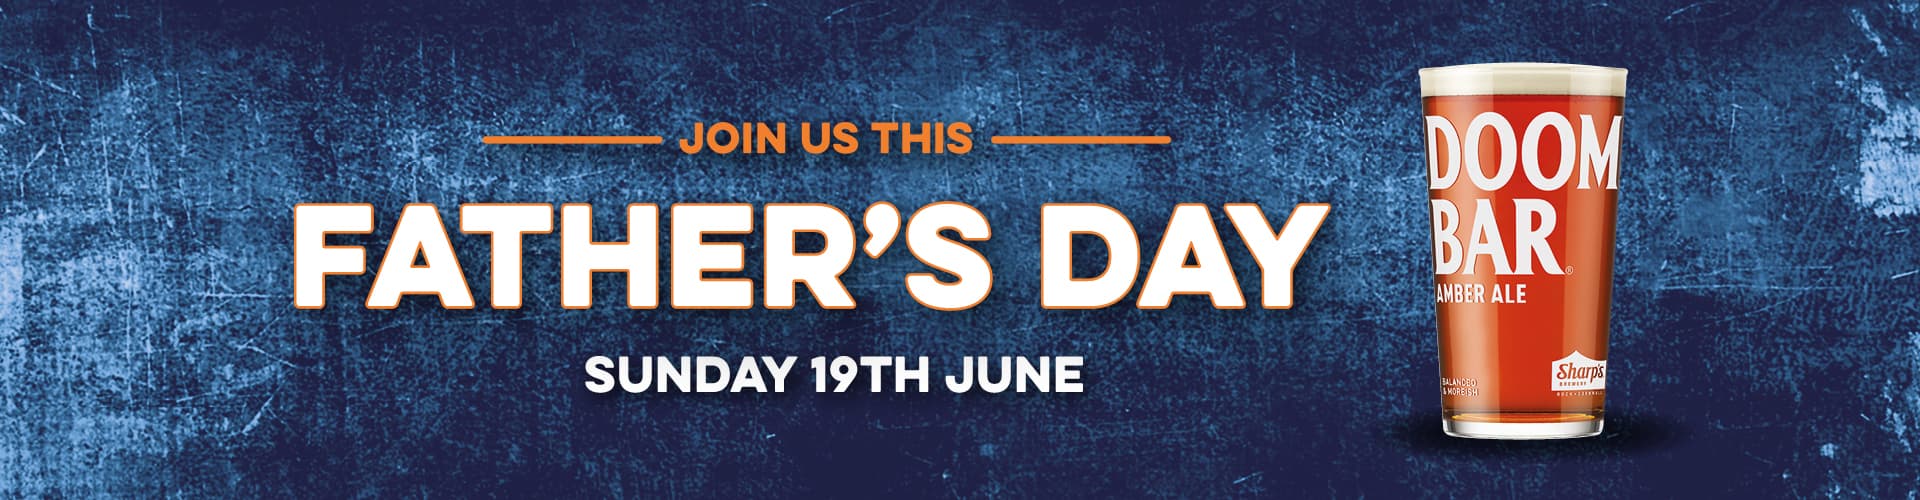 Father's Day at Three Judges pub in Glasgow